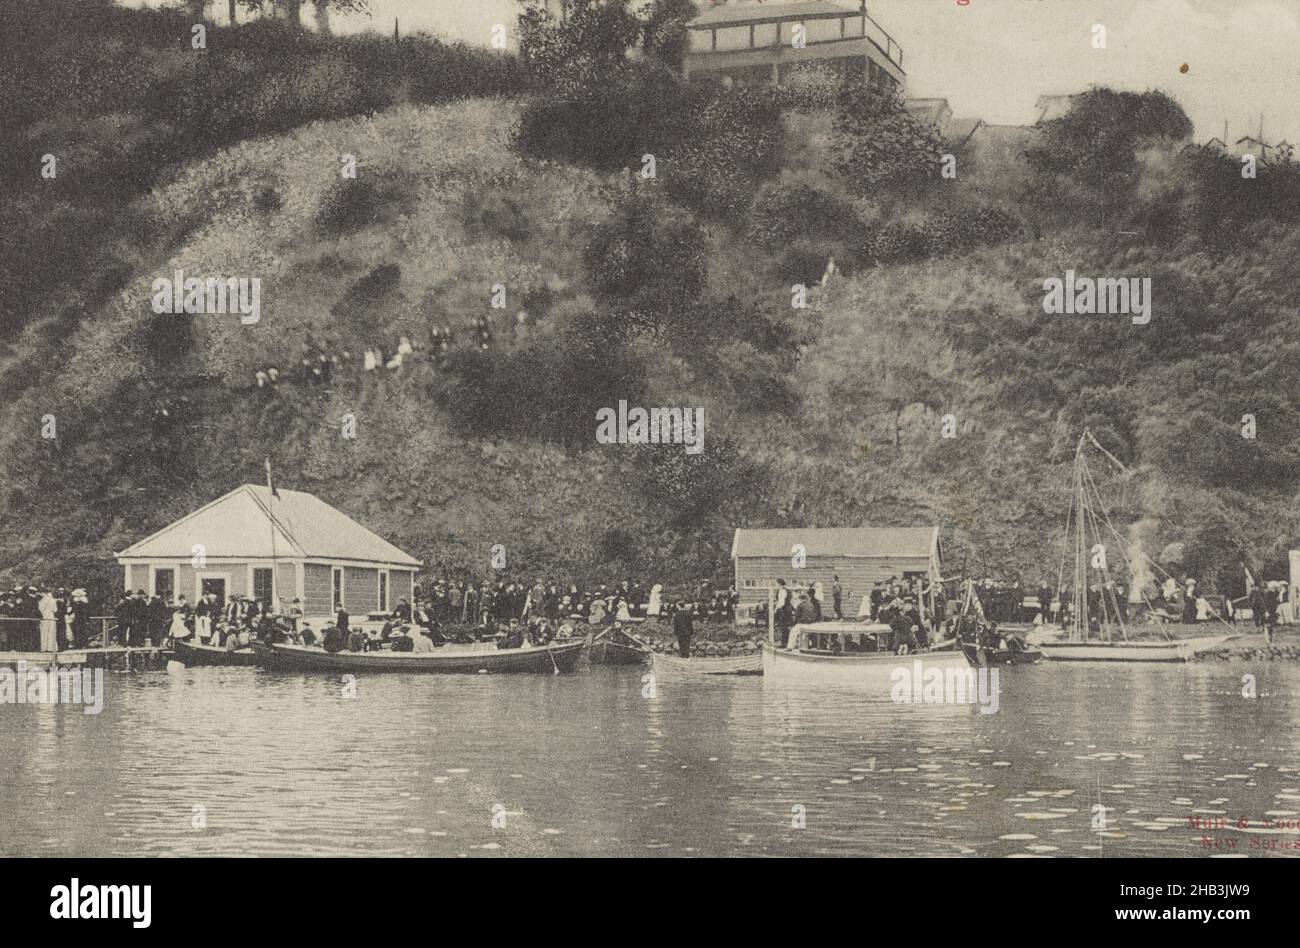 New Swimming Clubs shed, Port Chalmers, Muir & Moodie studio, 1909, Port Chalmers Stock Photo